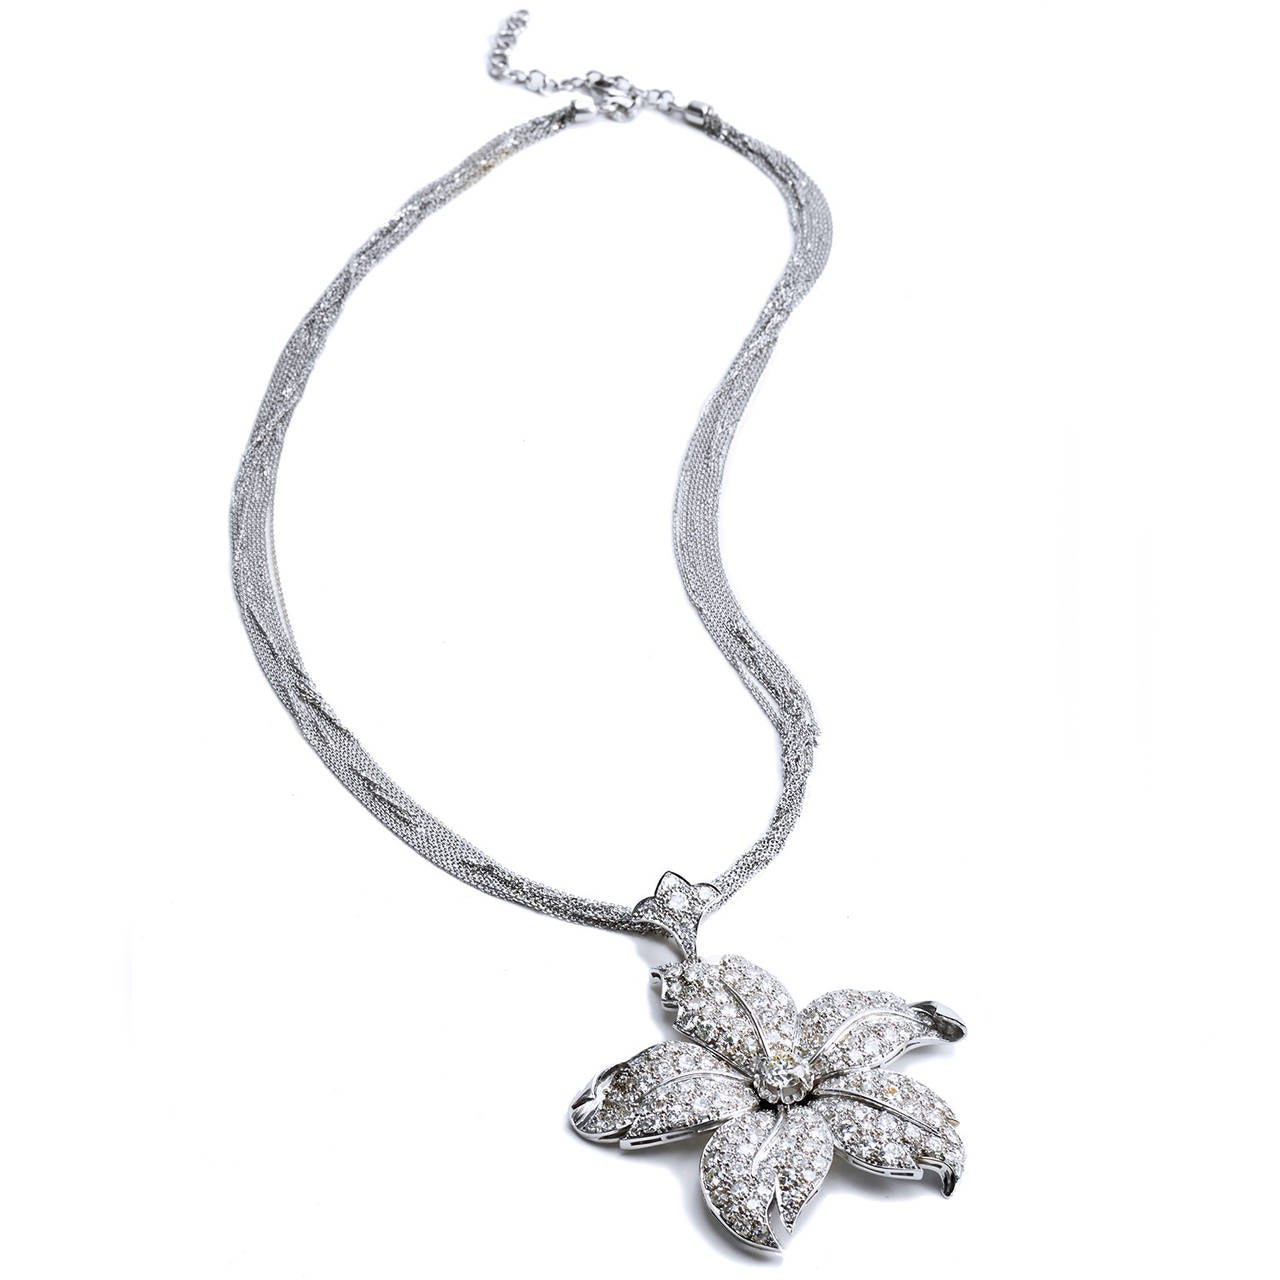 Flowers are nature’s symbol of life and compassion with the uncanny power to evoke happiness. This eternal 1940’s flower pendant is exquisitely handmade and fruitfully boasts approximately 12.85 carats of glistening diamonds set in platinum with